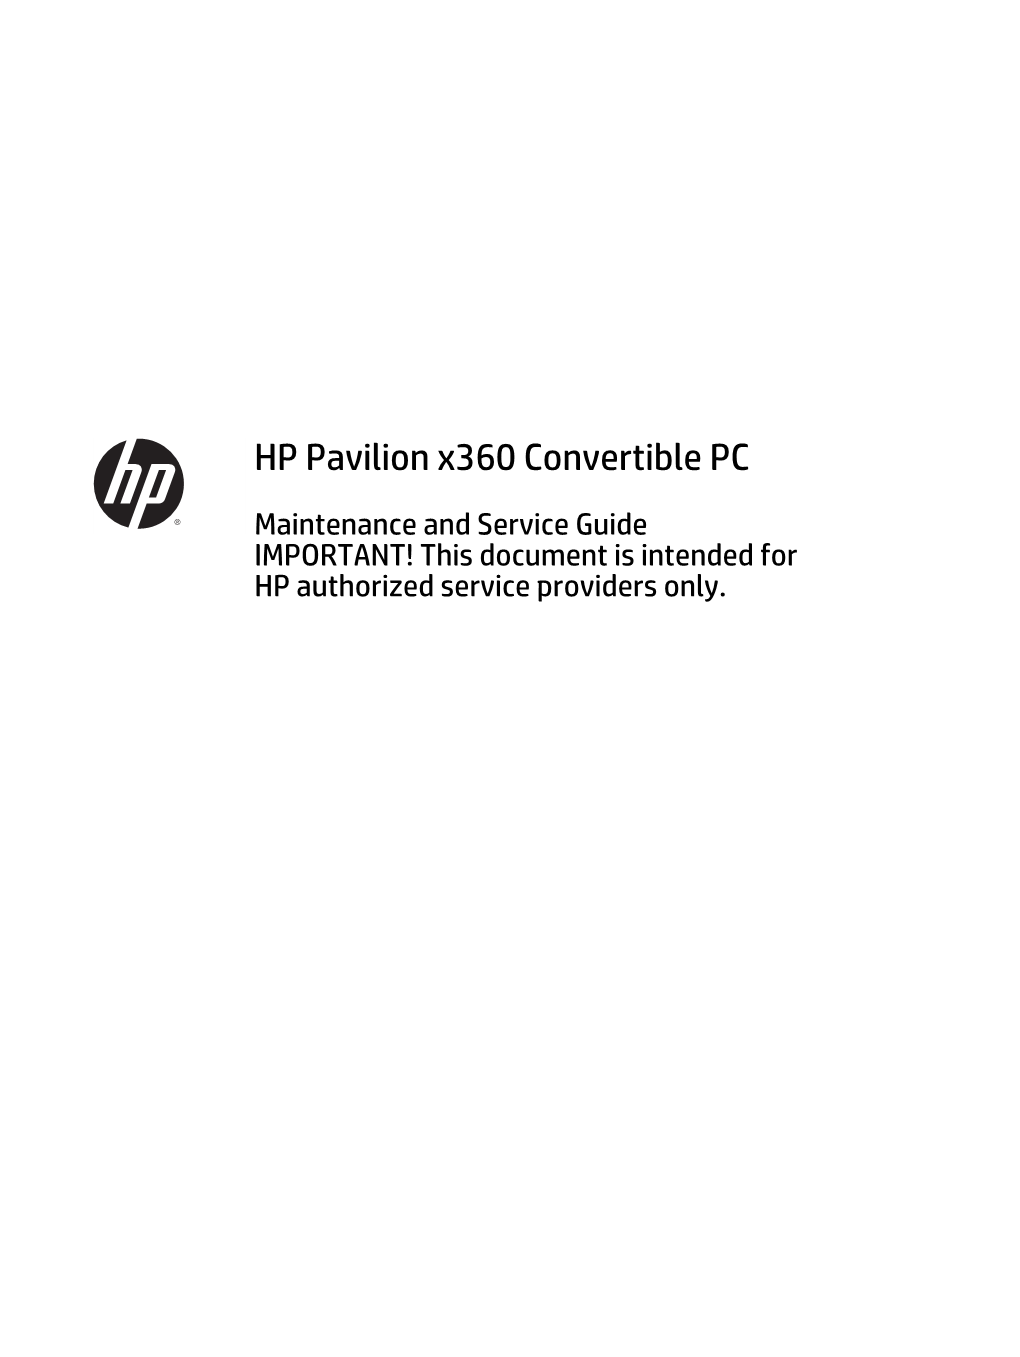 HP Pavilion X360 Convertible PC Maintenance and Service Guide